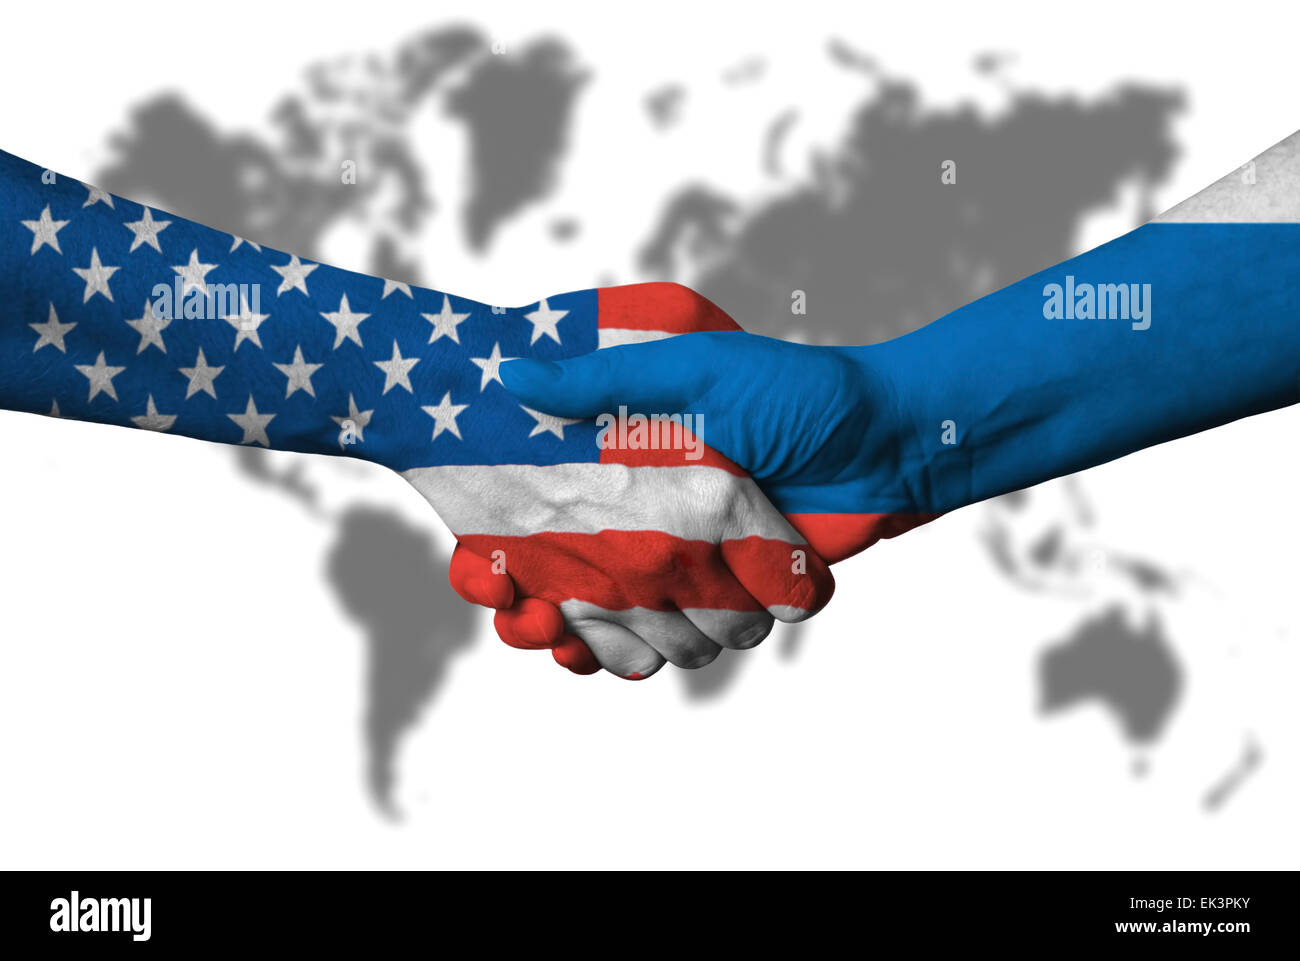 USA and Russian flag across handshake in front of world map. Stock Photo